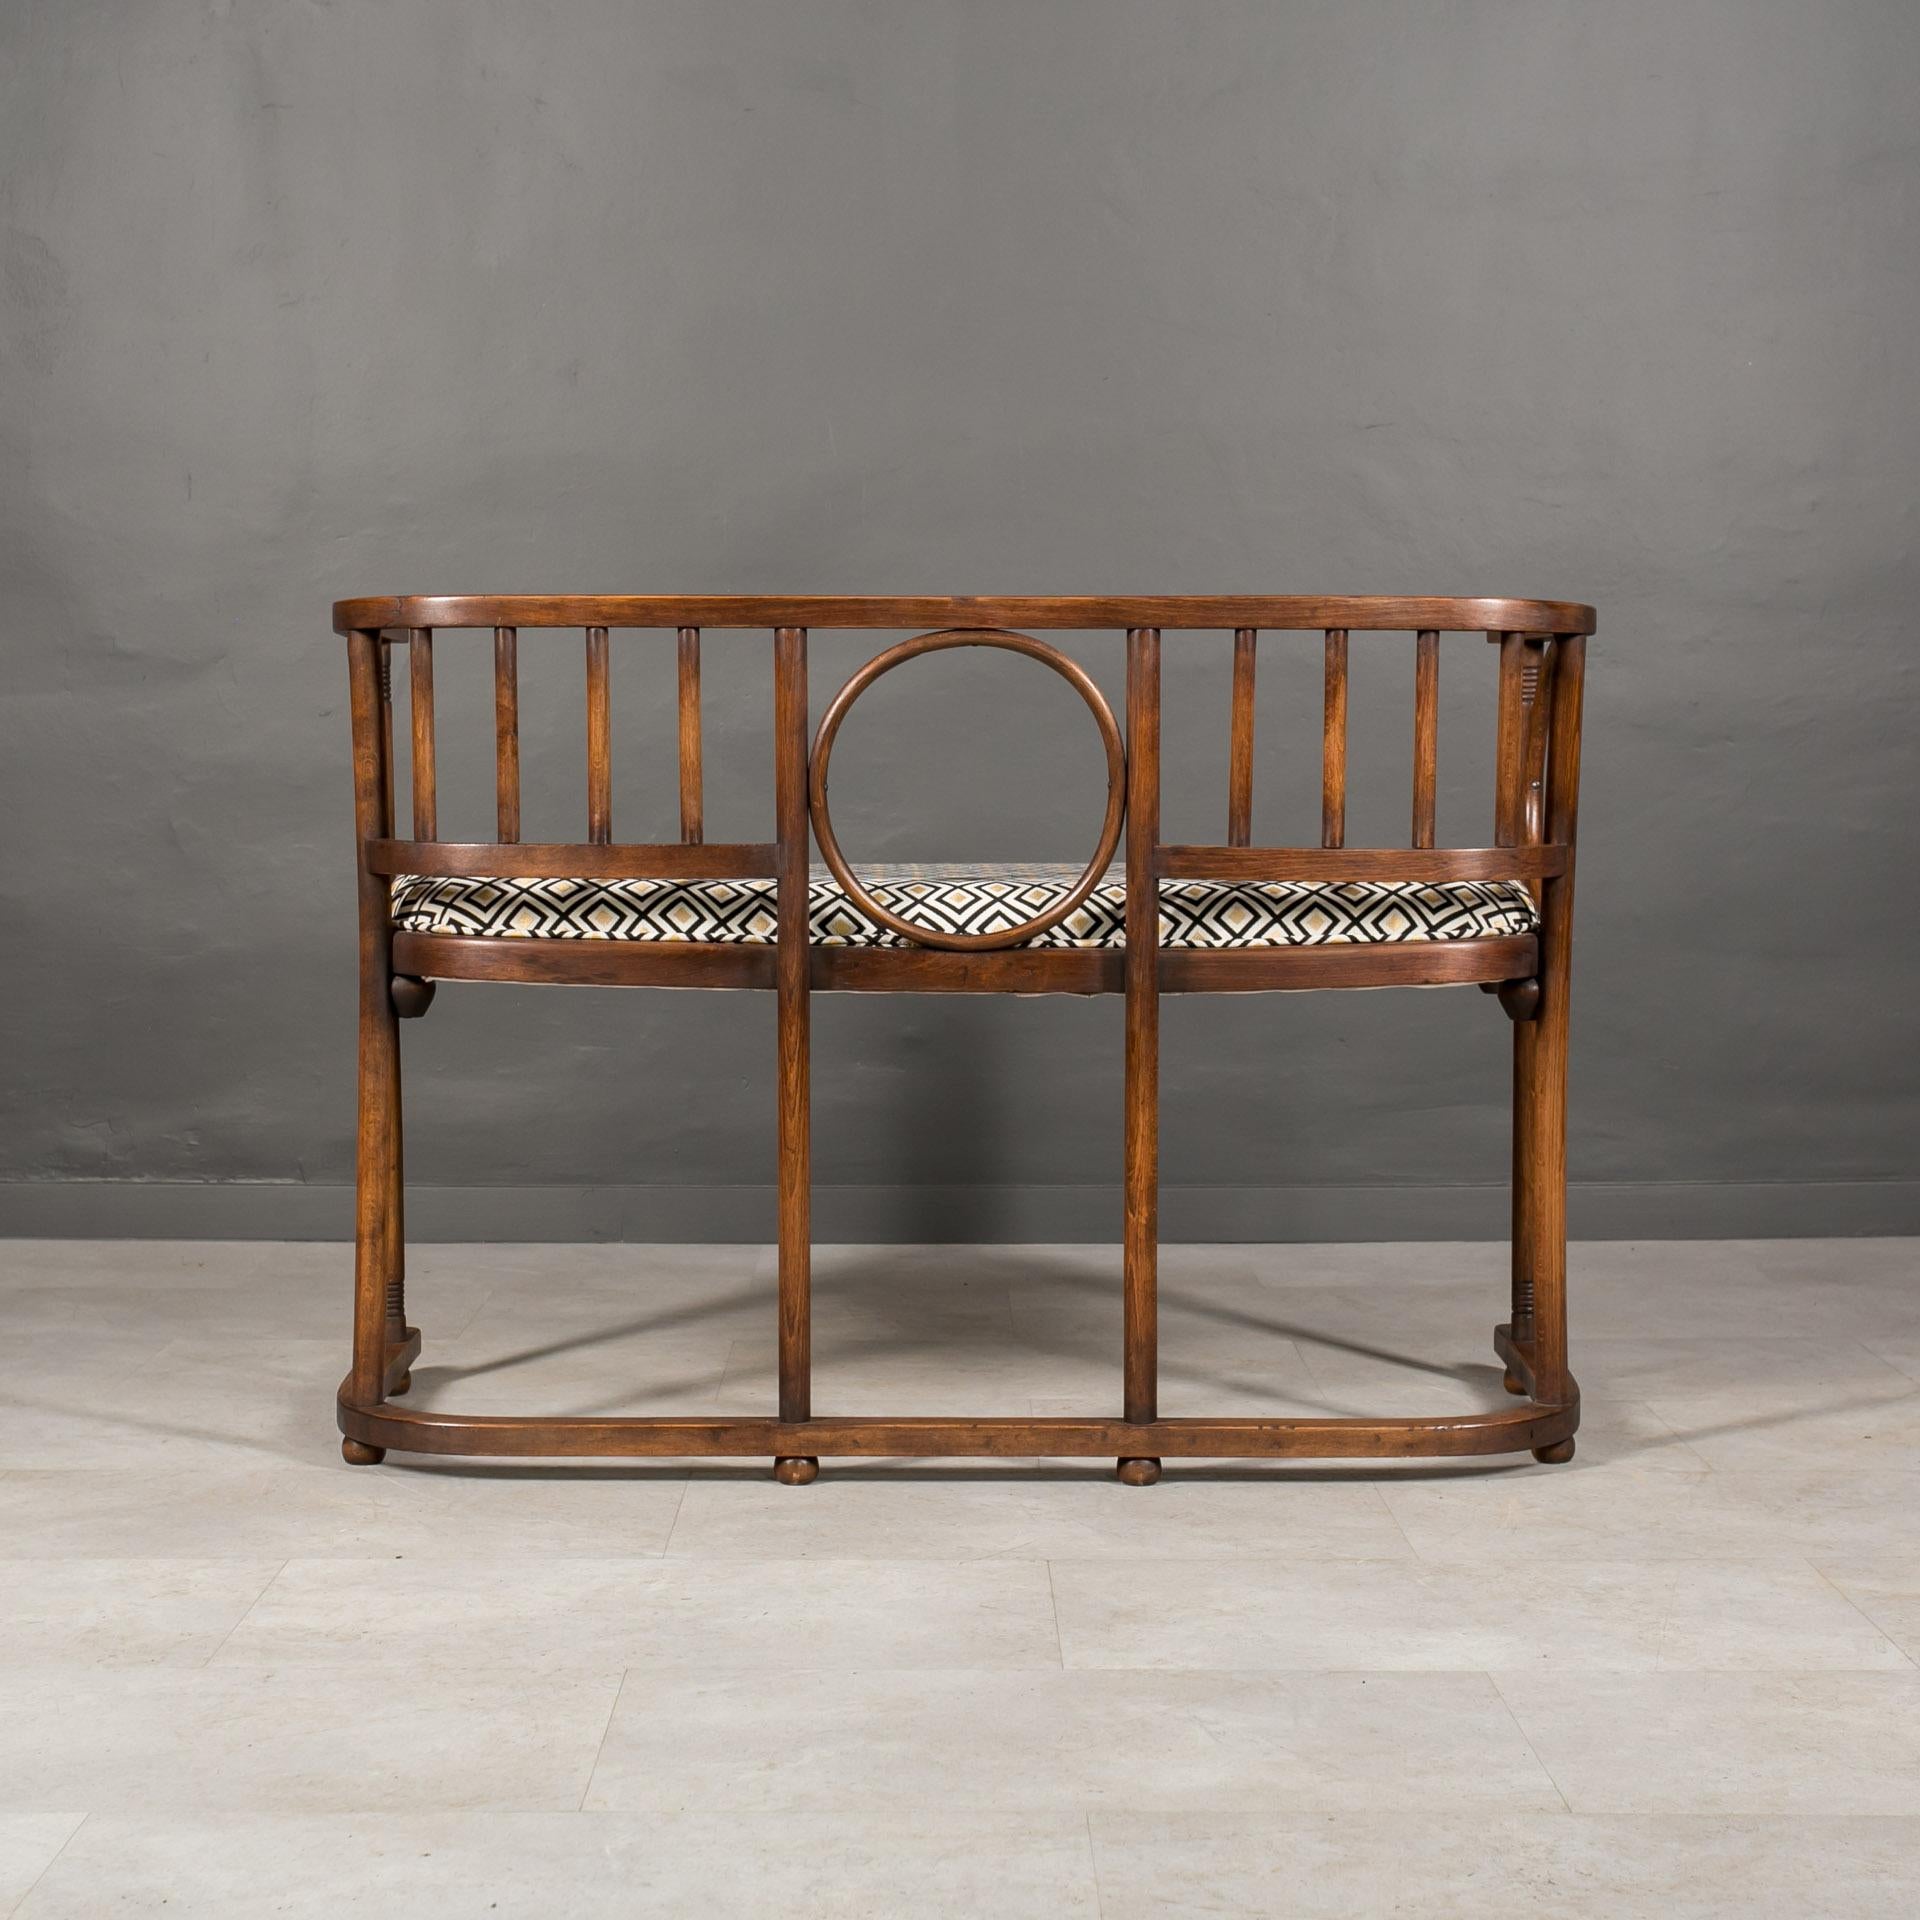 Austrian Early 20th Century Bentwood Bench Settee by J. Hoffmann for Thonet - Mundus